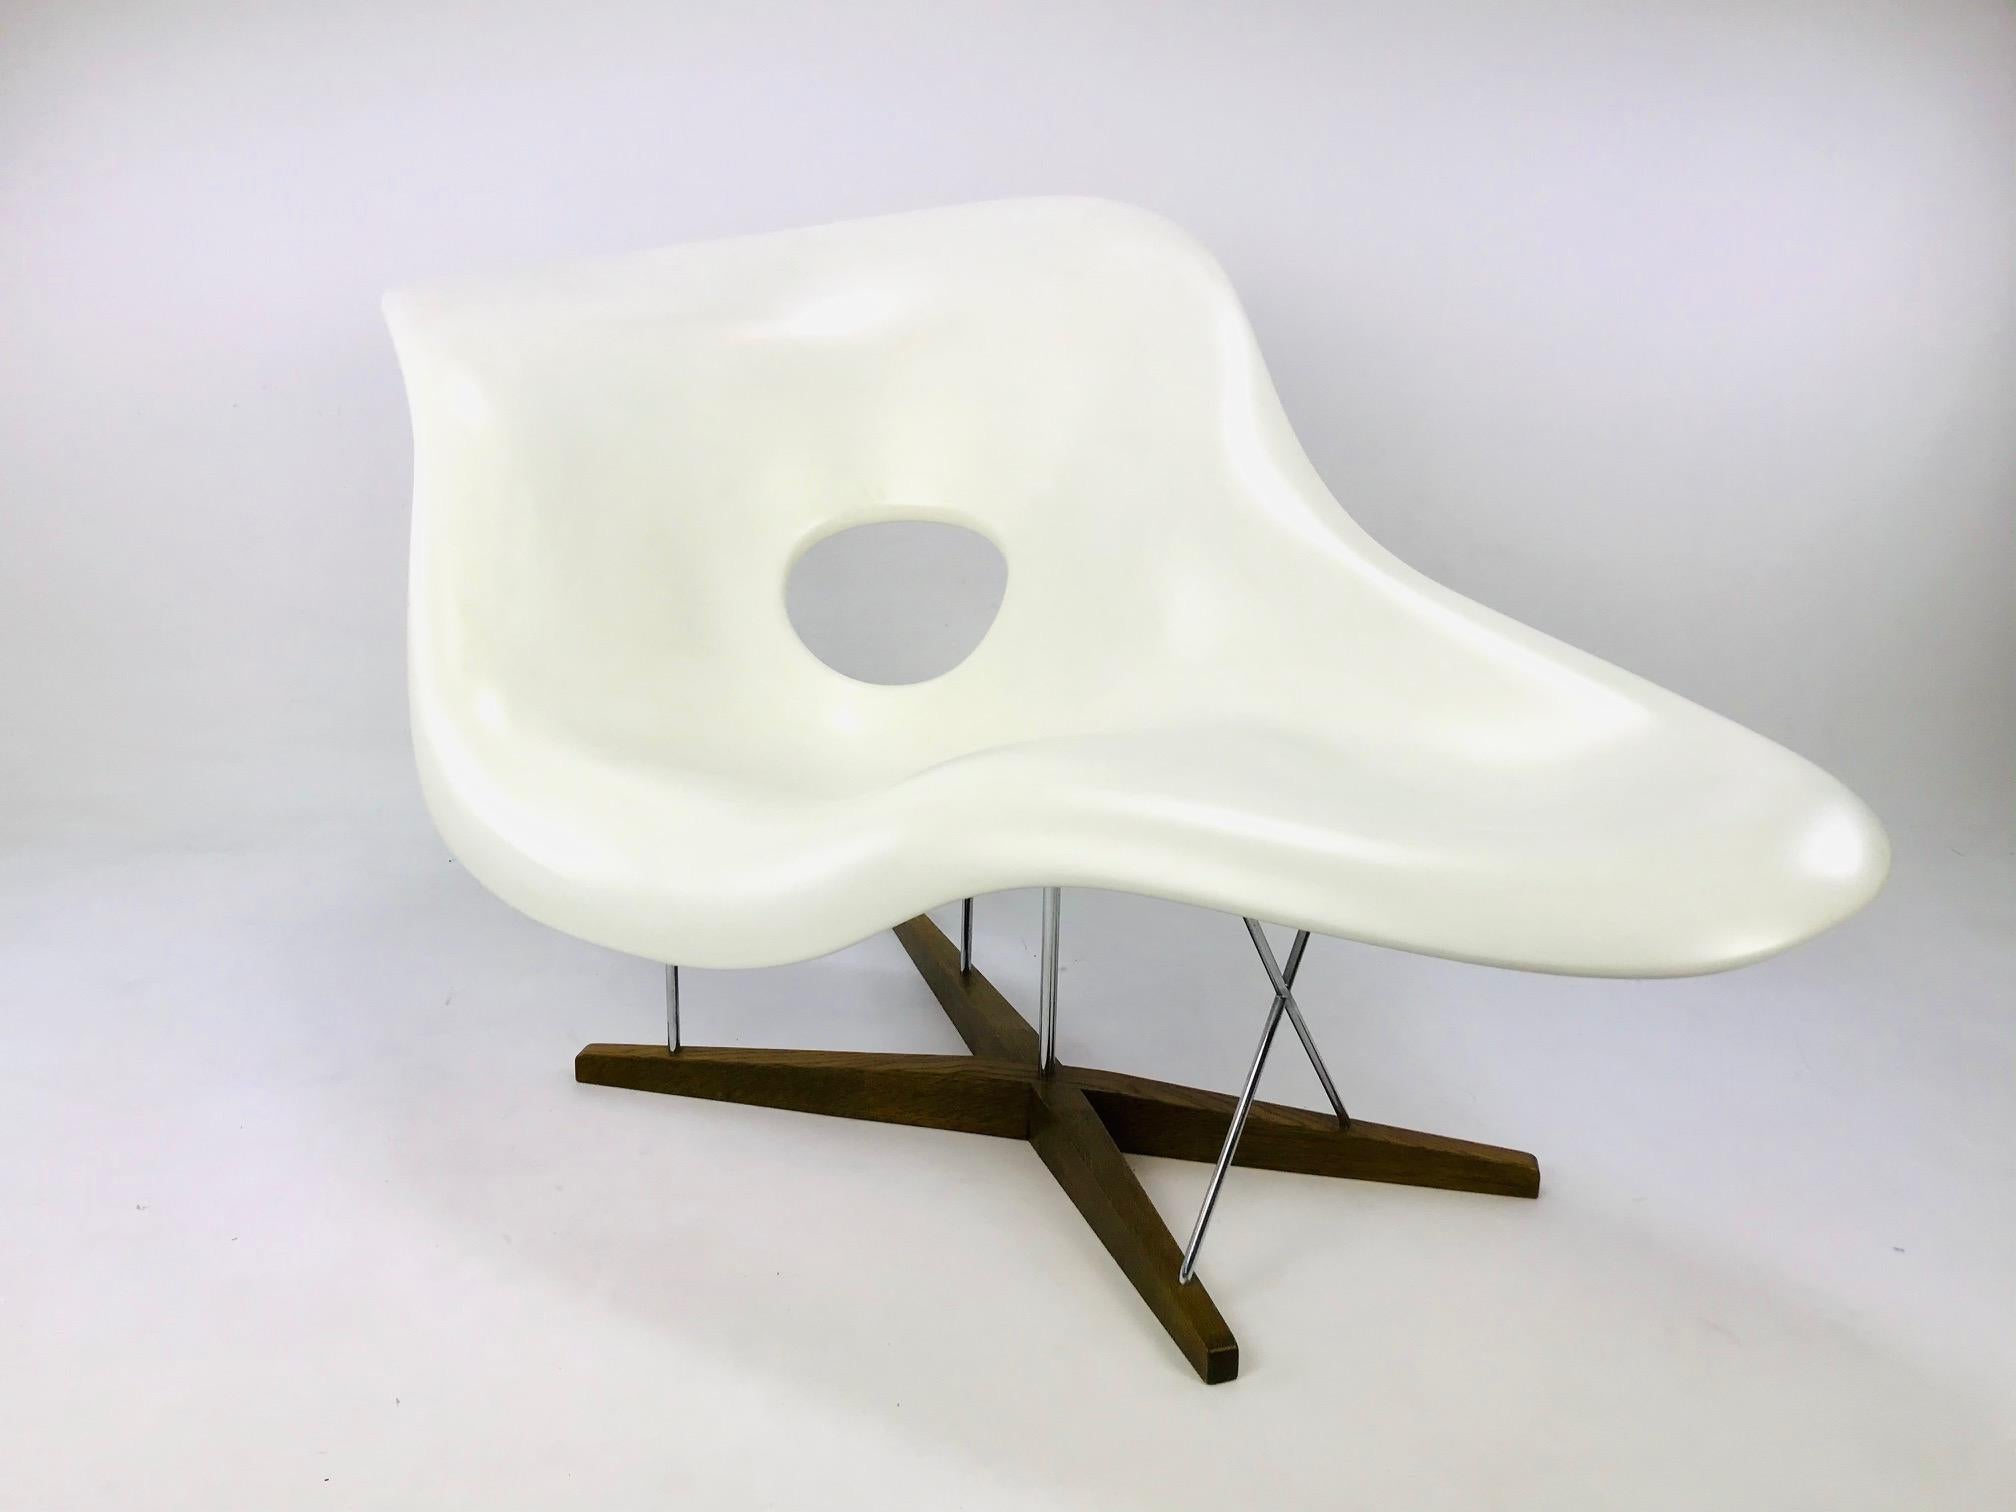 The Vitra La chaise lounge chair is a design by Charles & Ray Eames. The inspiration for the La Chaise was found by the Eames couple in a sculpture by Gaston Lachaise called 'Floating Figure'. The armchair owes its name to this. The La Chaise Lounge